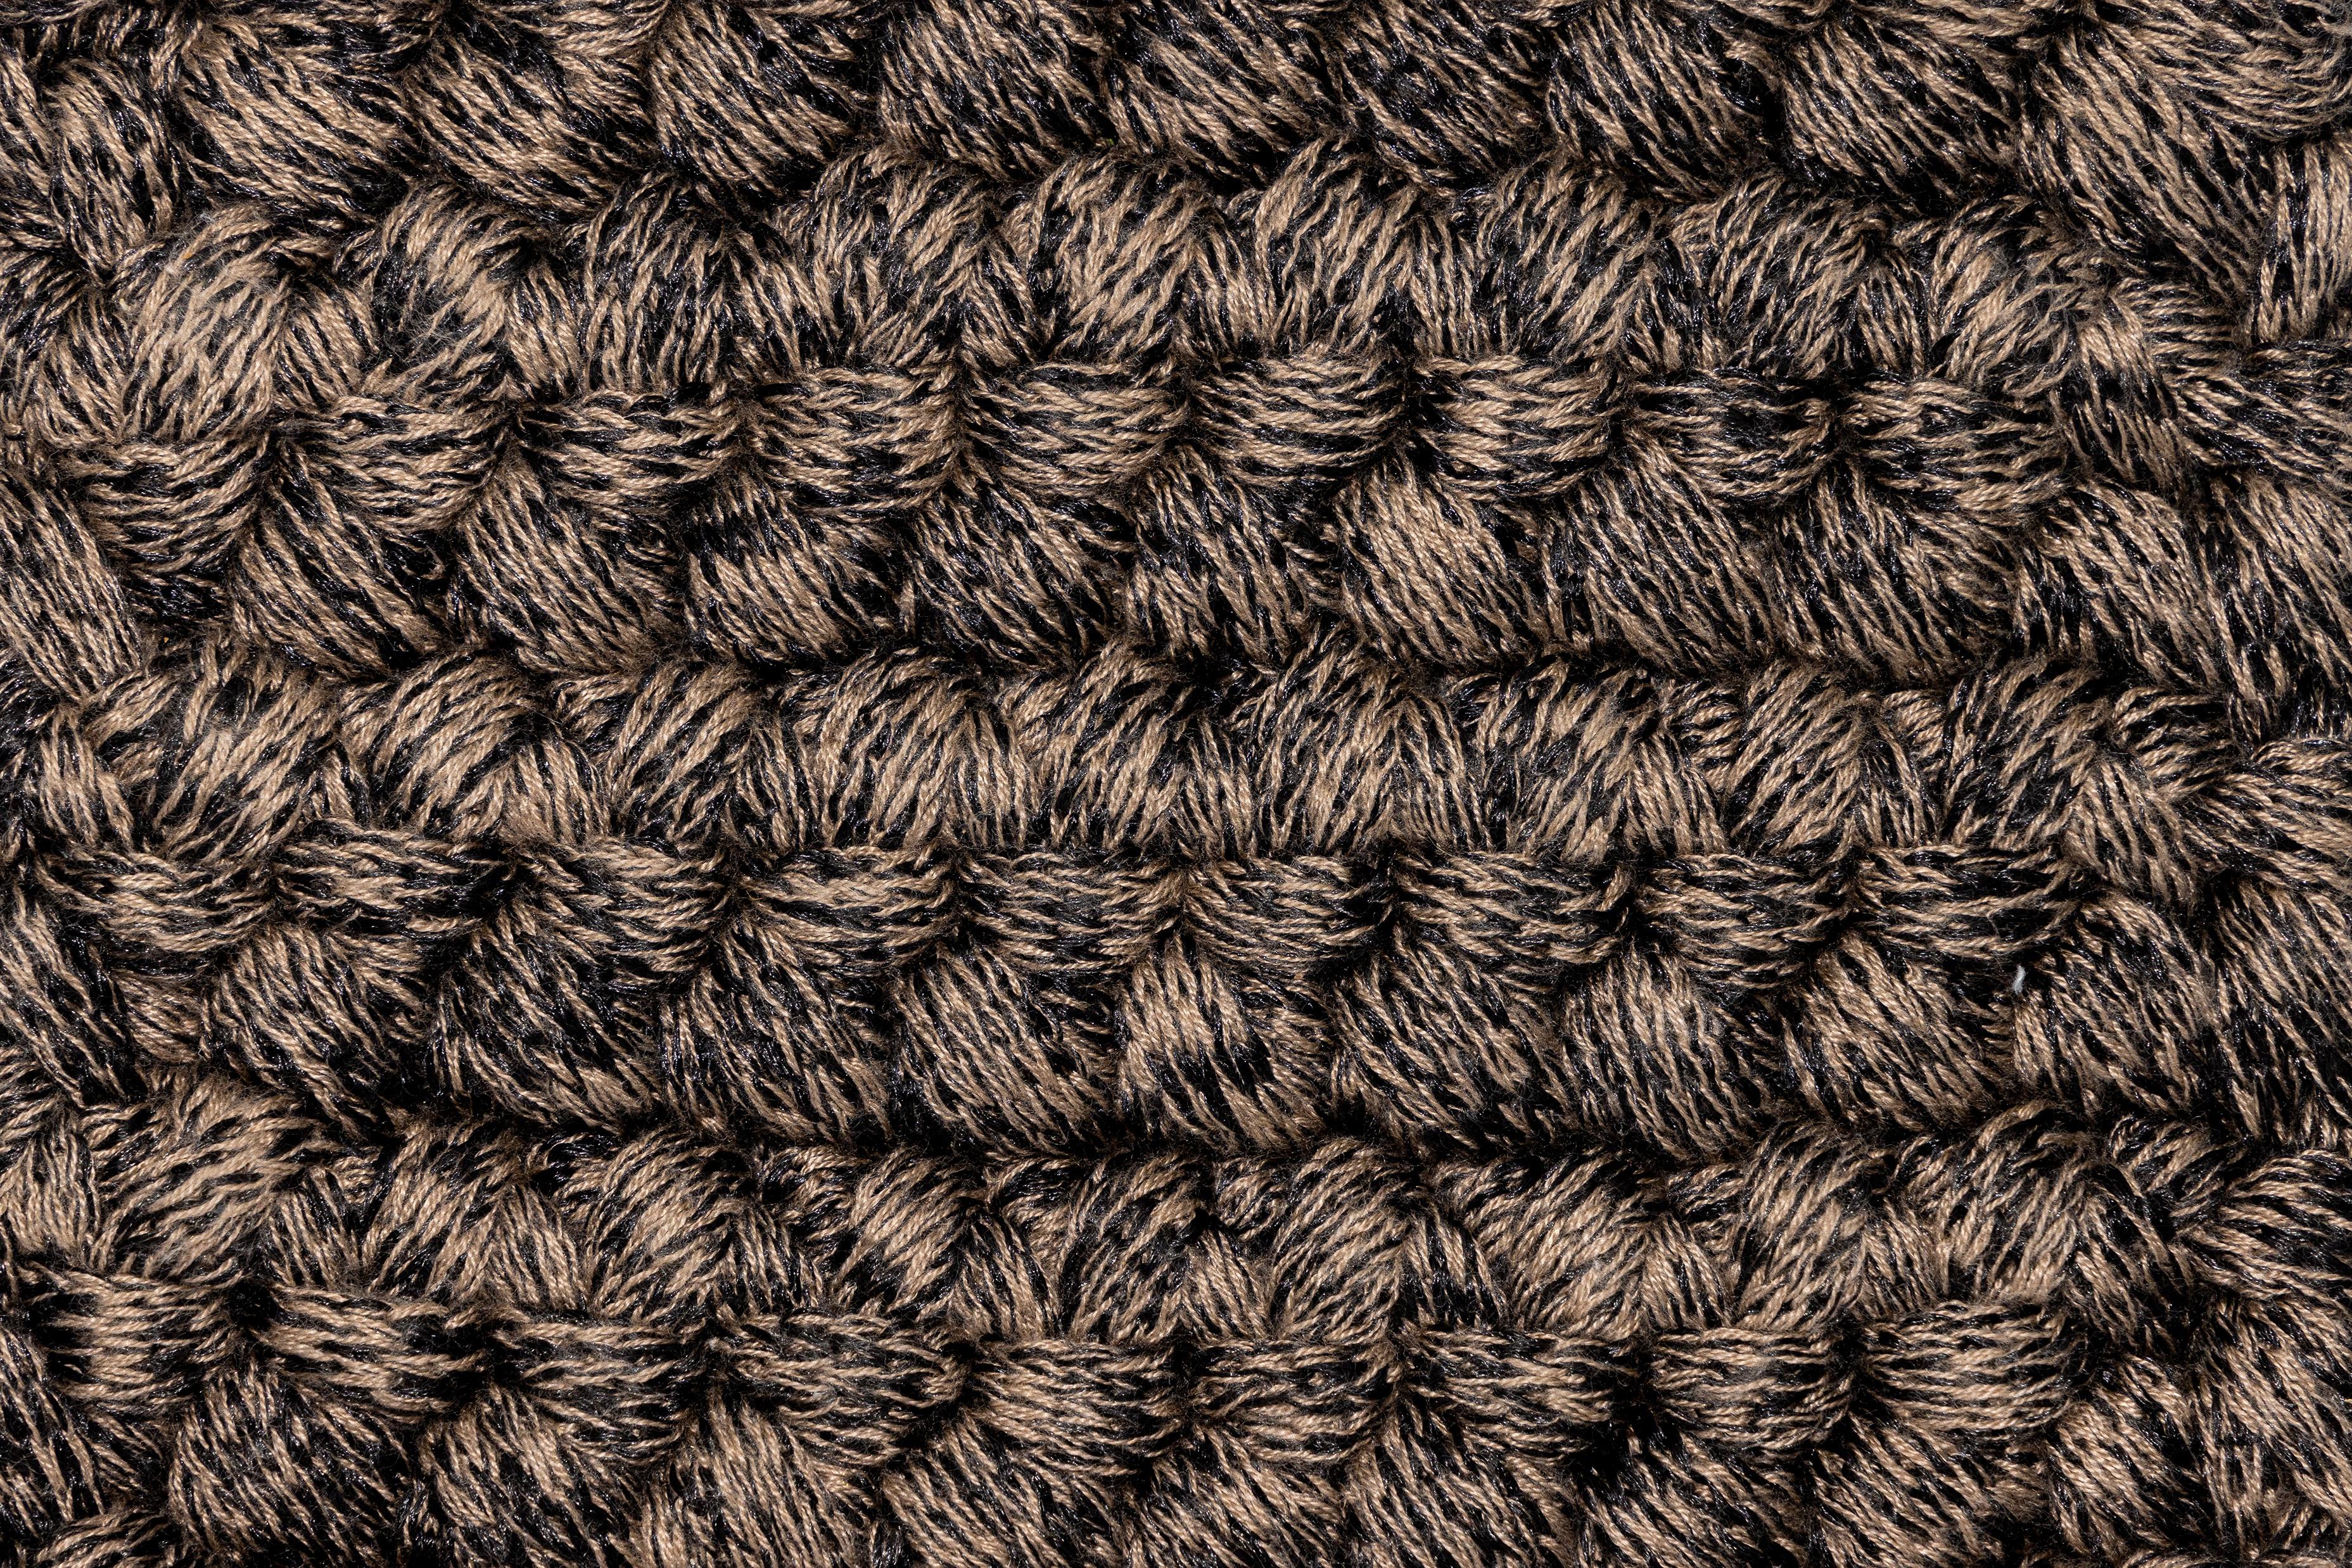 Hand-Crafted Handmade Crochet 200x300 cm Thick Rug in Cacao Black with Tassels For Sale